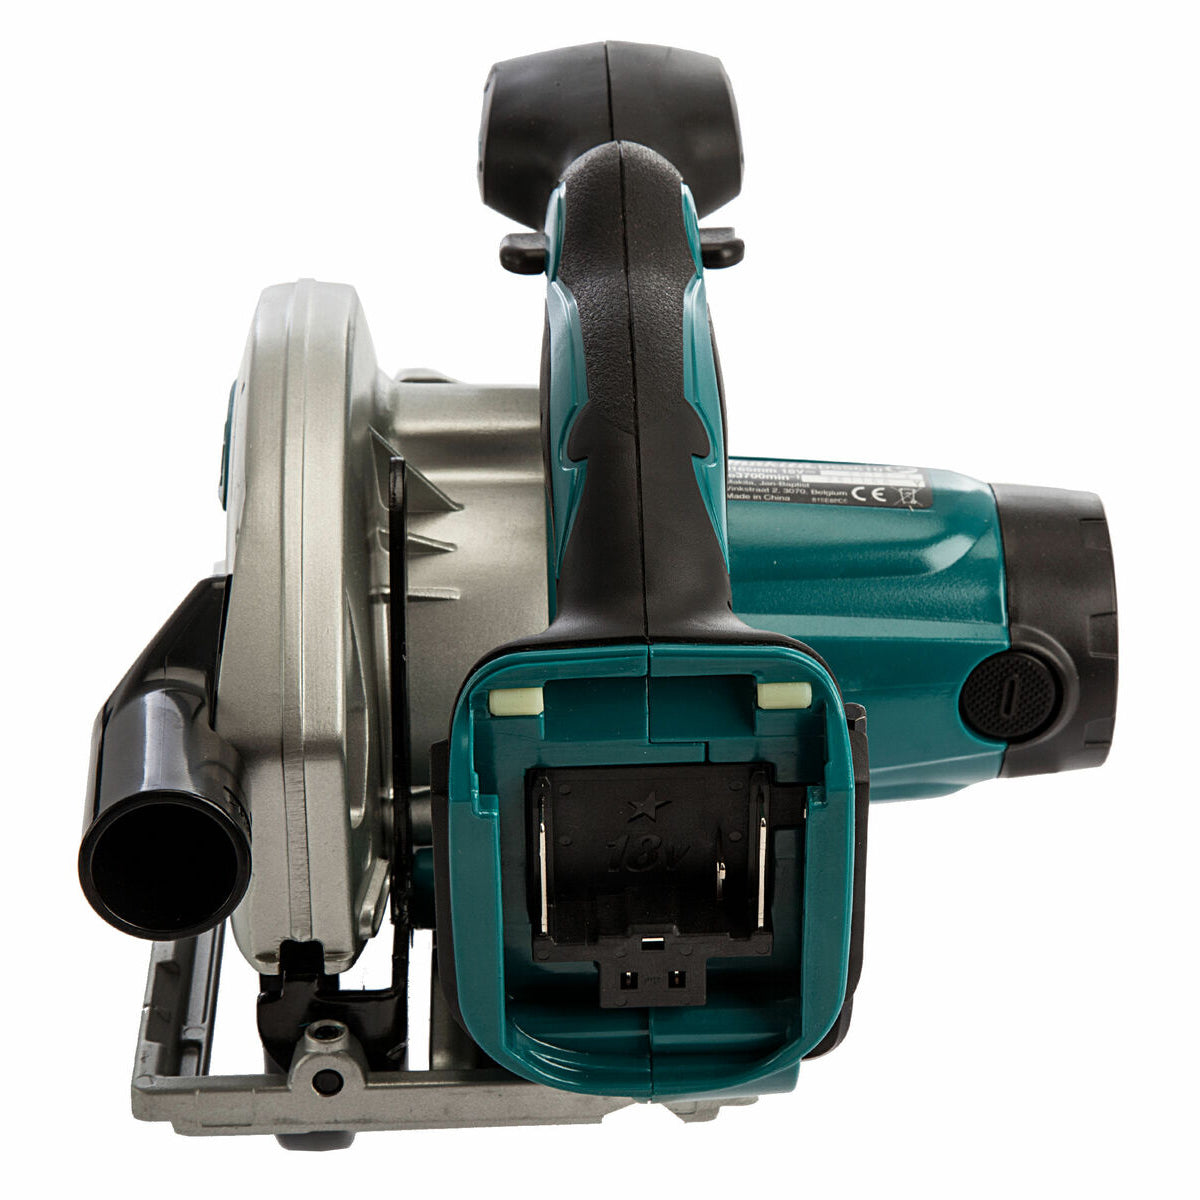 Makita DSS610Z 18V 165mm Circular Saw with Type-3 Makpac Case & 24T Saw Blade